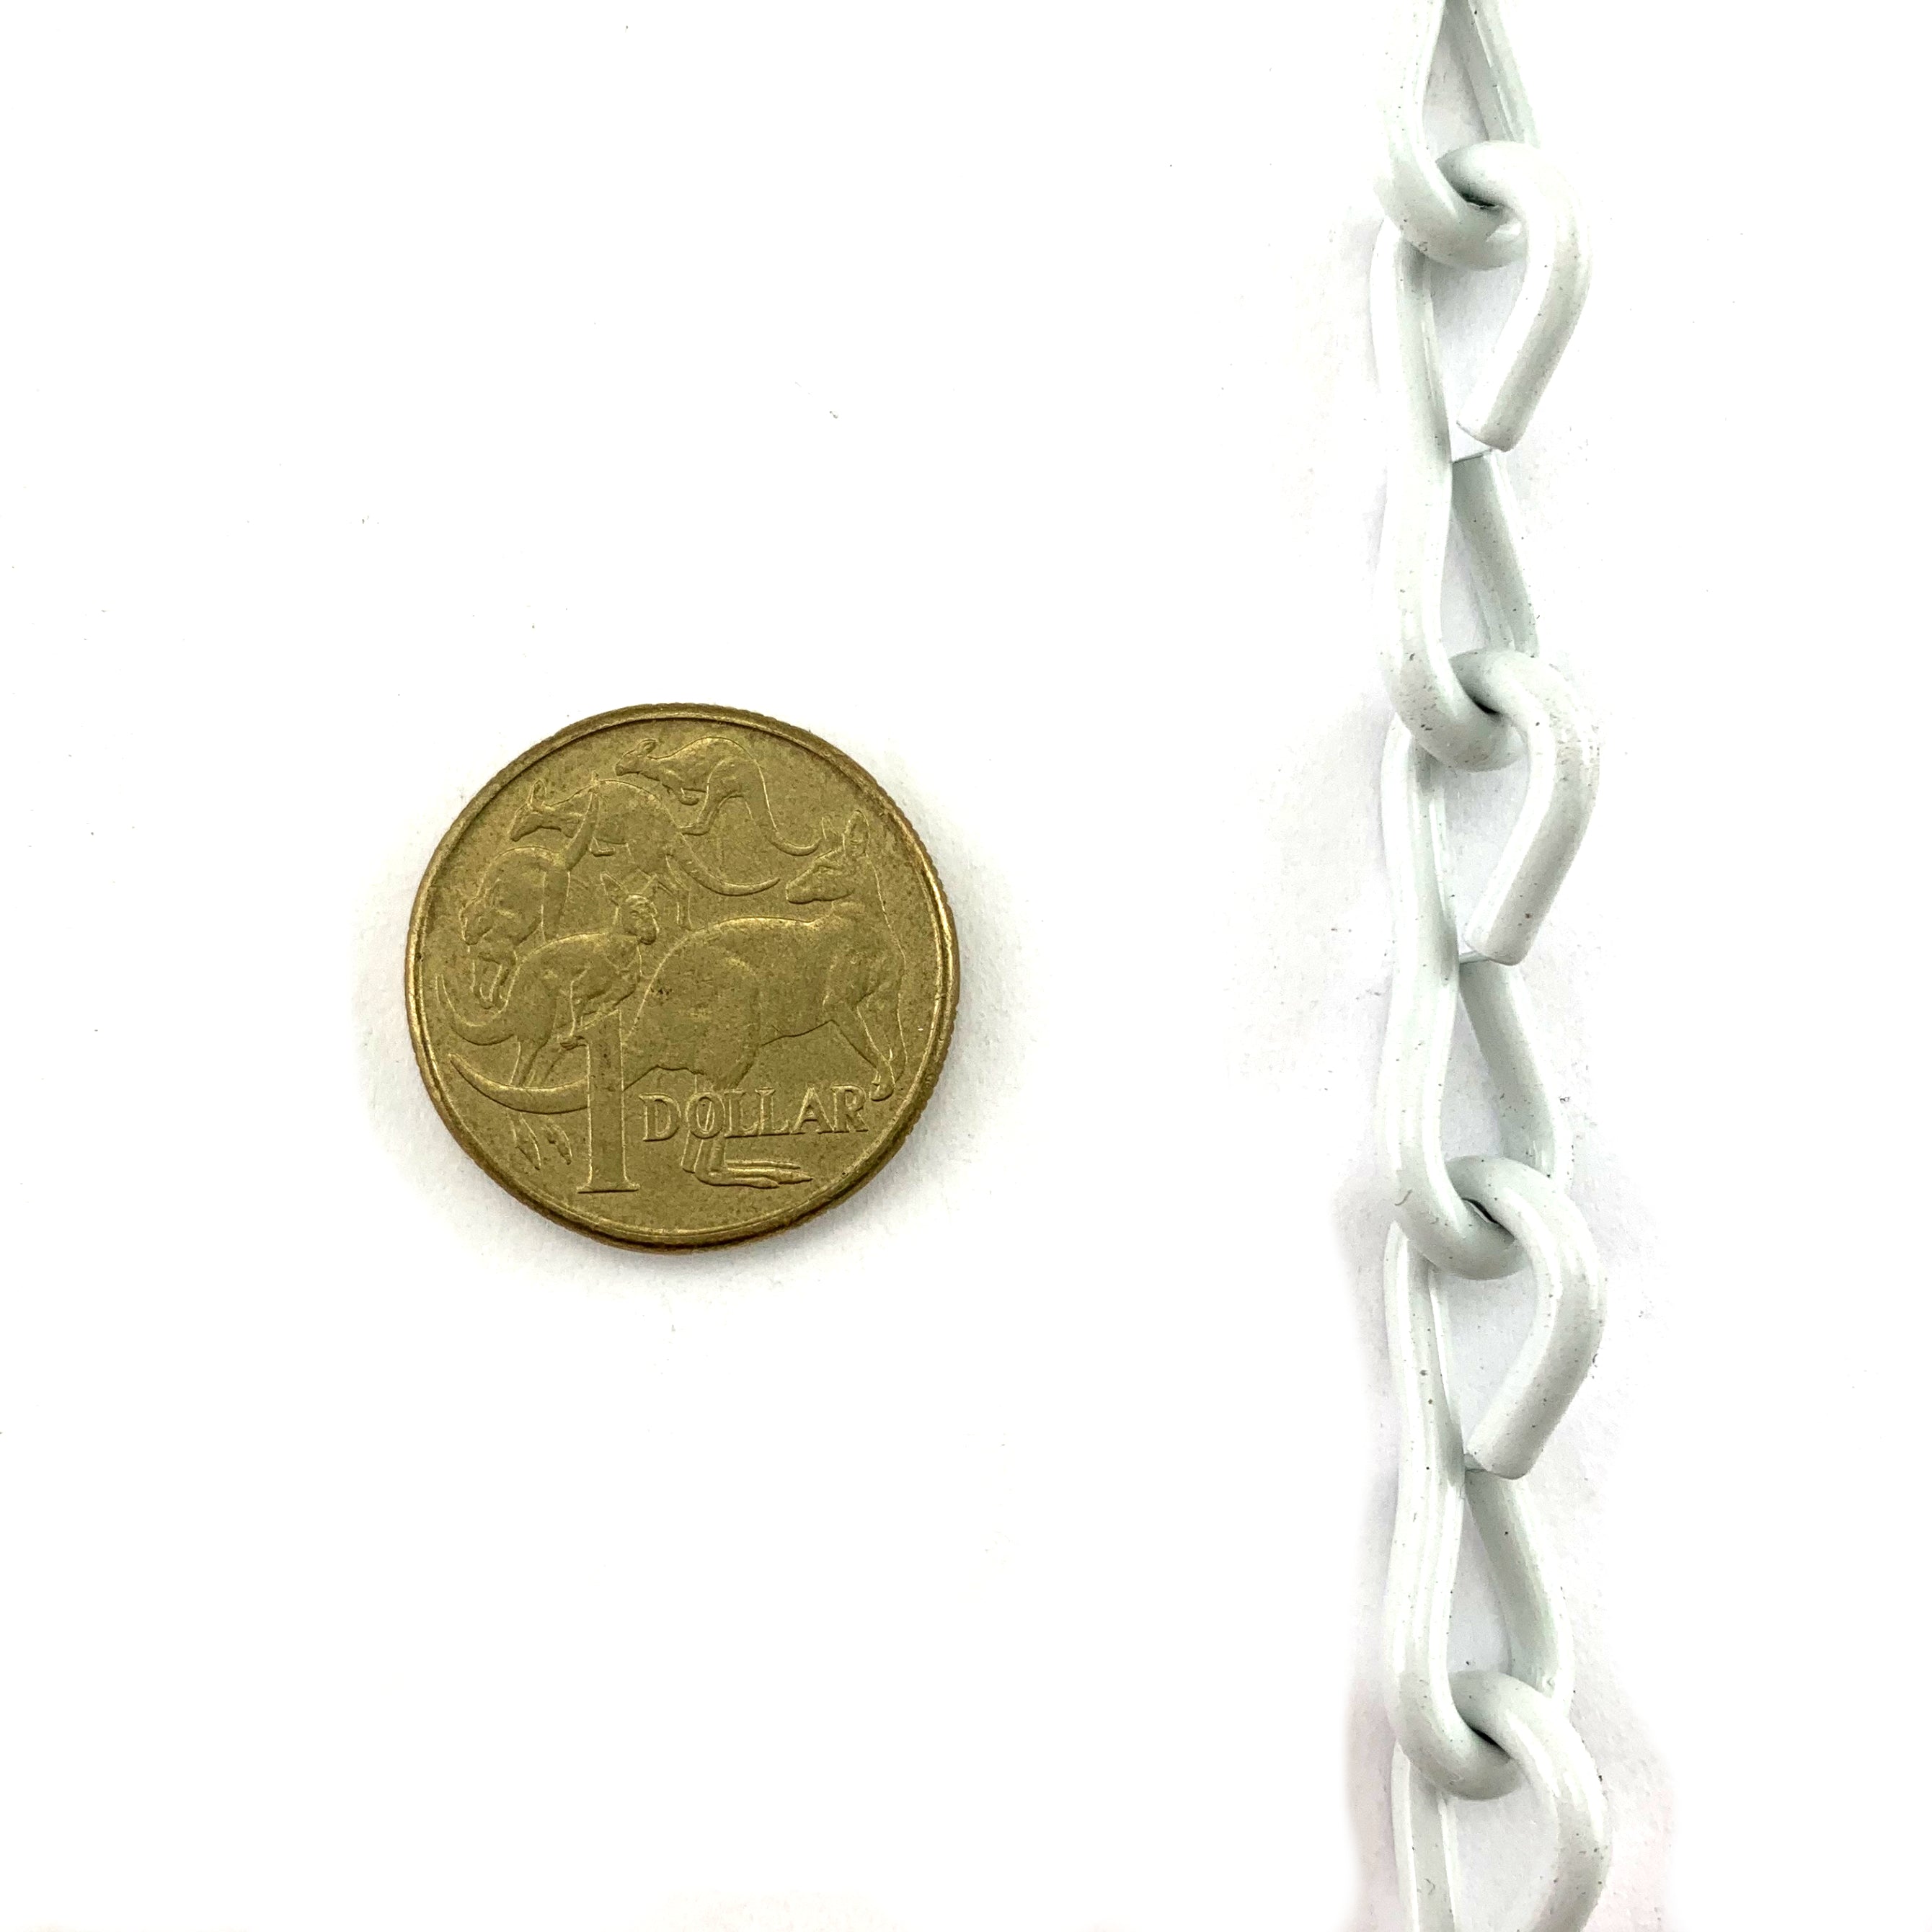 Single Jack Chain White Powder Coated, Size: 2.5mm. Order by the metre